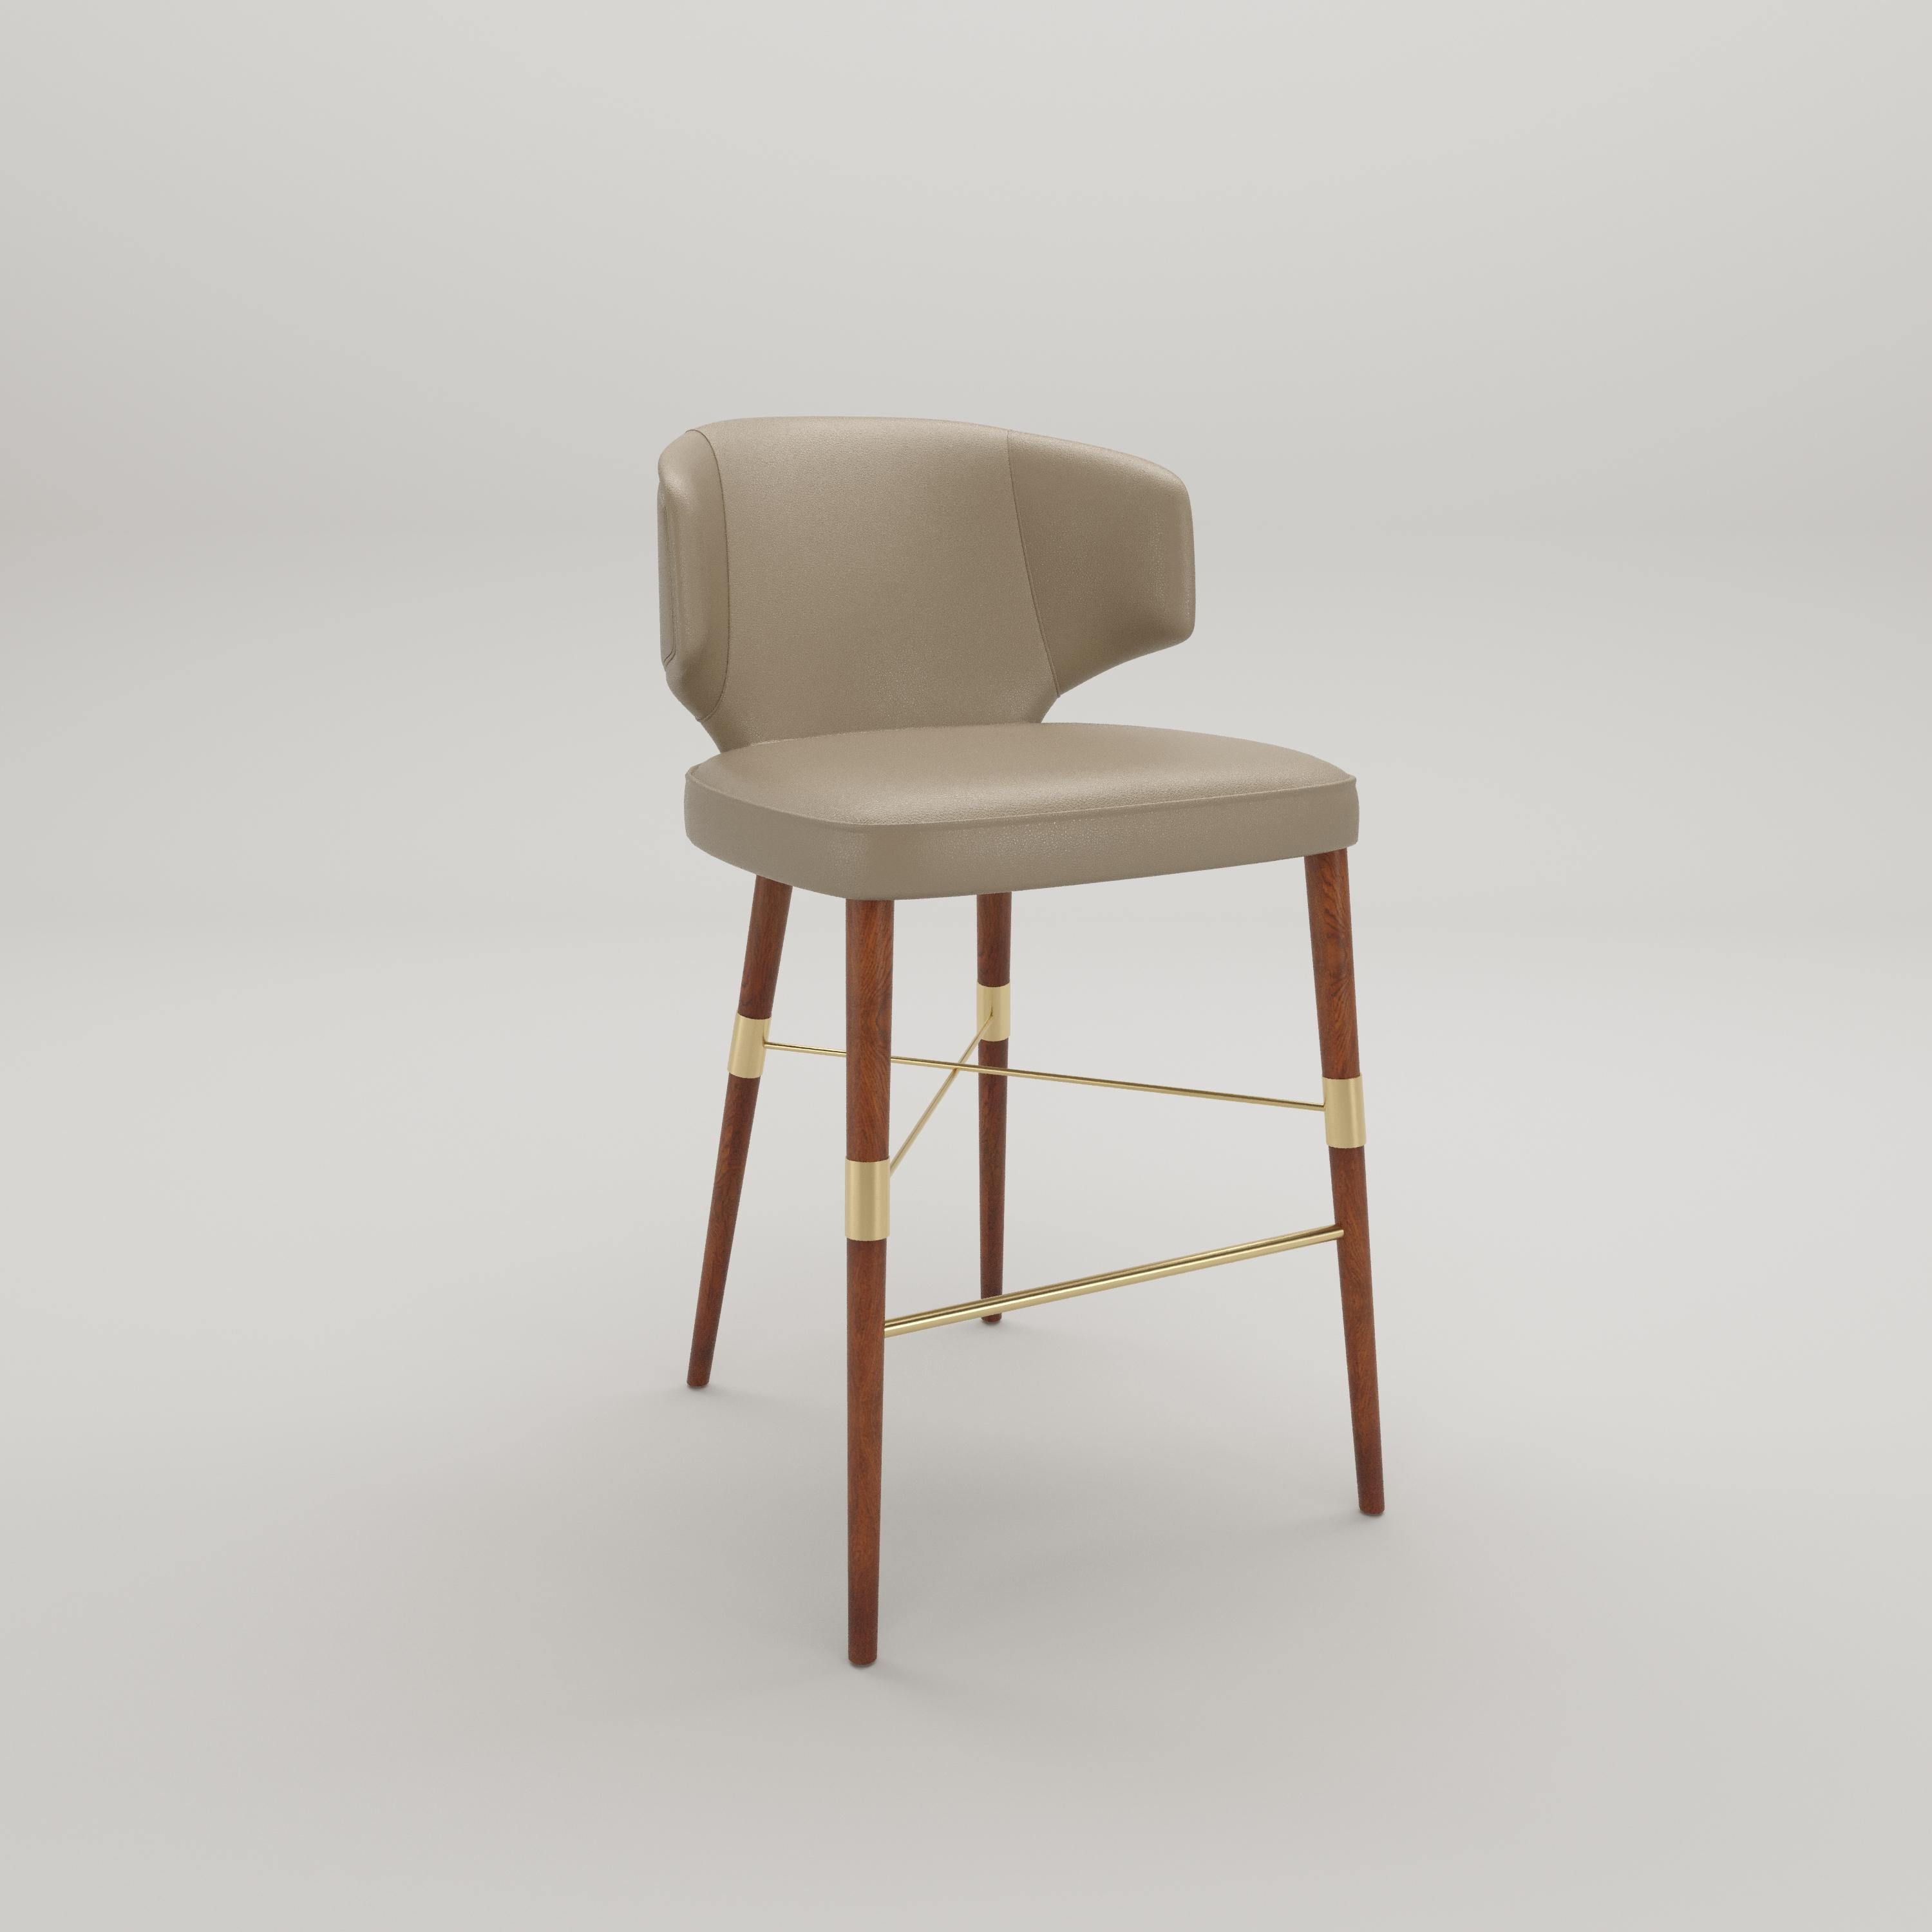 The YORK bar stool is crafted with a design that seamlessly contours to your body, YORK promises unparalleled comfort for those delightful kitchen moments. Its wooden feet, embraced by a sleek metallic structure, exude modern elegance, while the